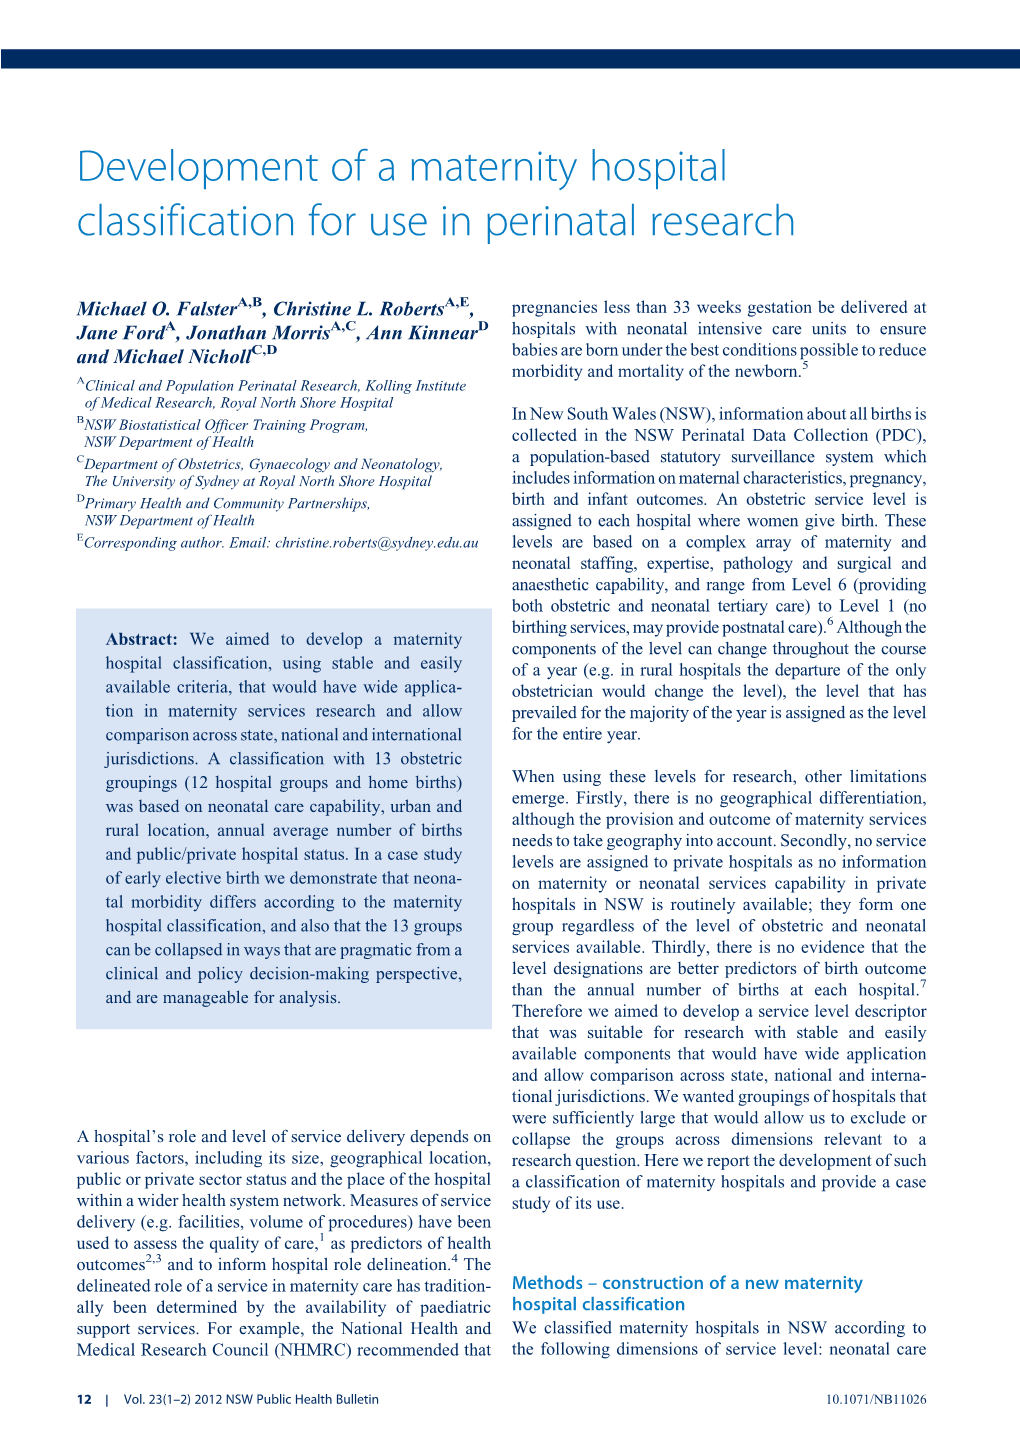 Development of a Maternity Hospital Classification for Use in Perinatal Research